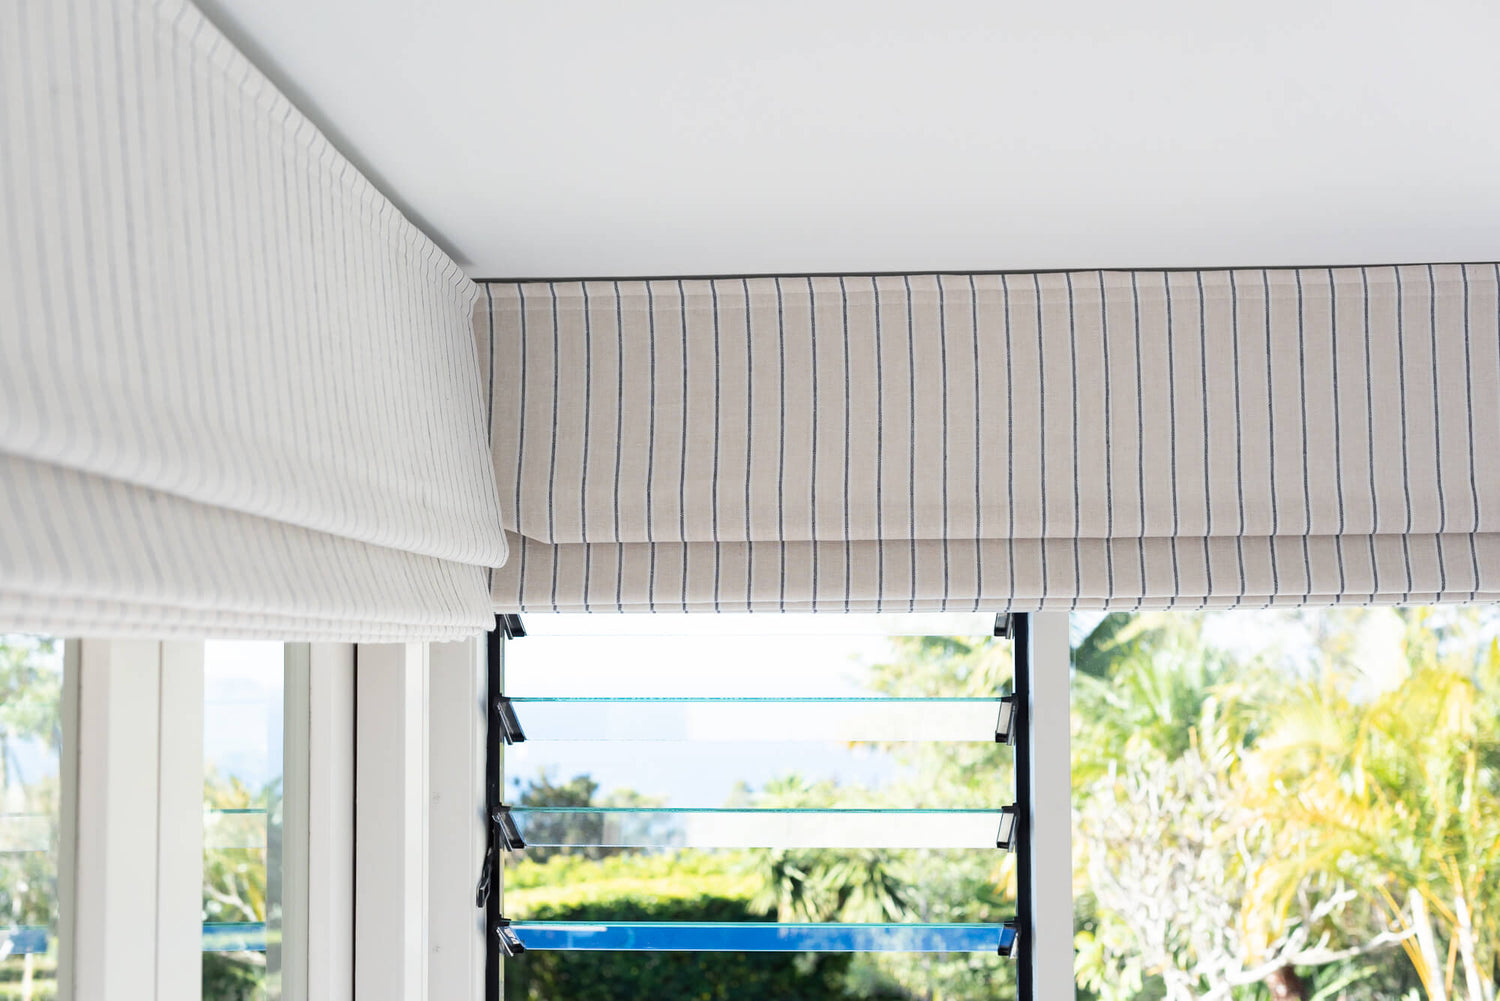 Striped Roman shade in a bright room with a view of a tropical pool area, offering a chic and airy window dressing.